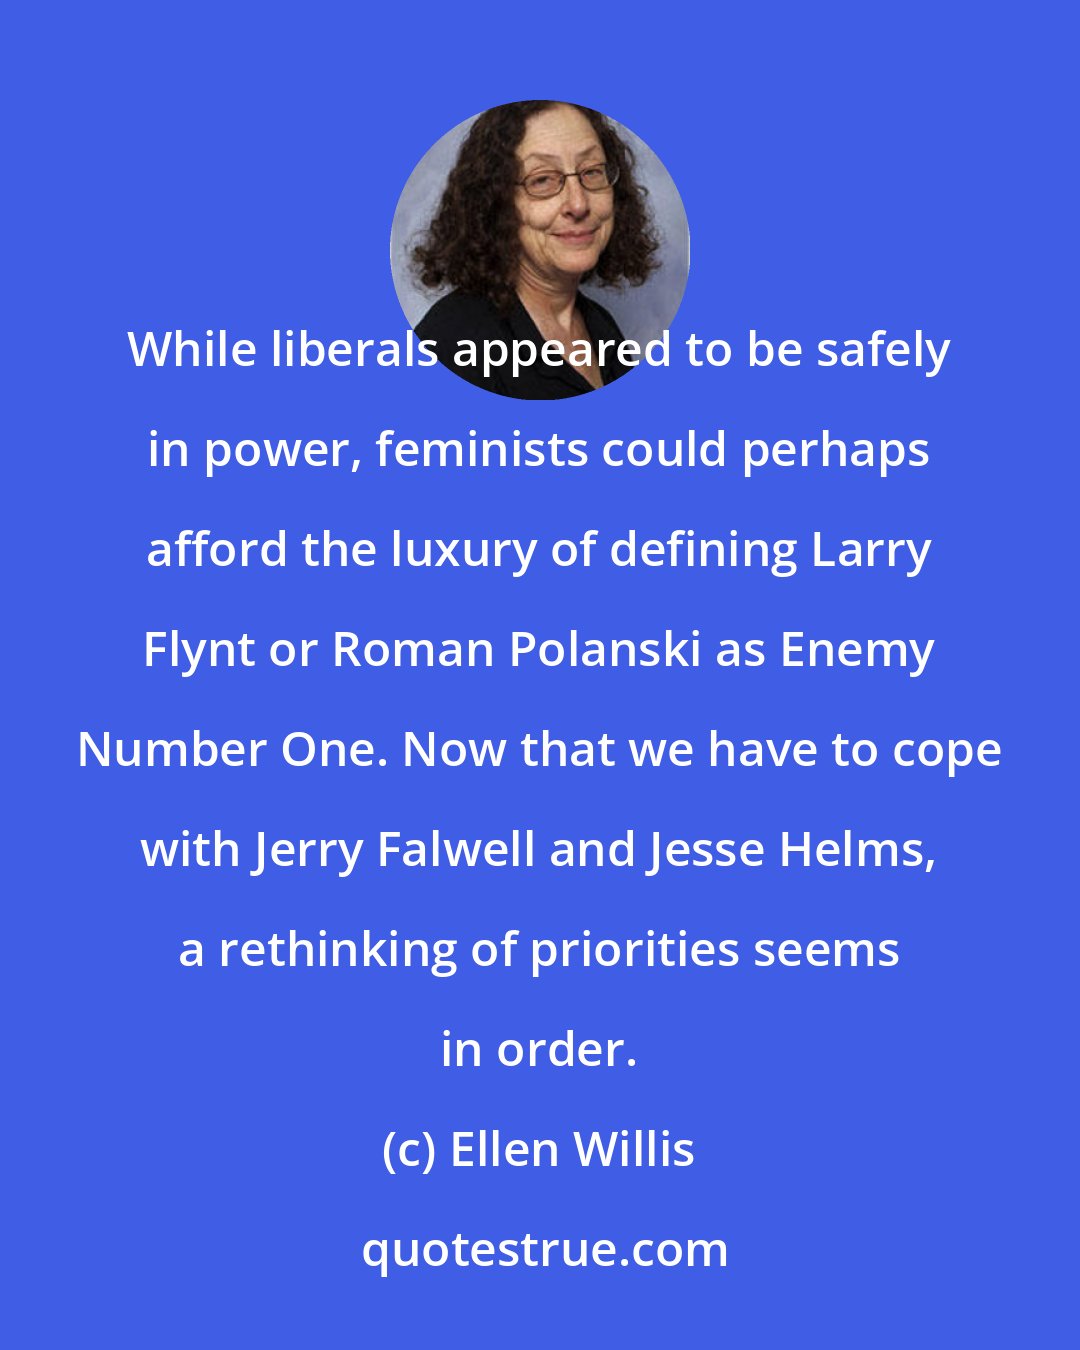 Ellen Willis: While liberals appeared to be safely in power, feminists could perhaps afford the luxury of defining Larry Flynt or Roman Polanski as Enemy Number One. Now that we have to cope with Jerry Falwell and Jesse Helms, a rethinking of priorities seems in order.